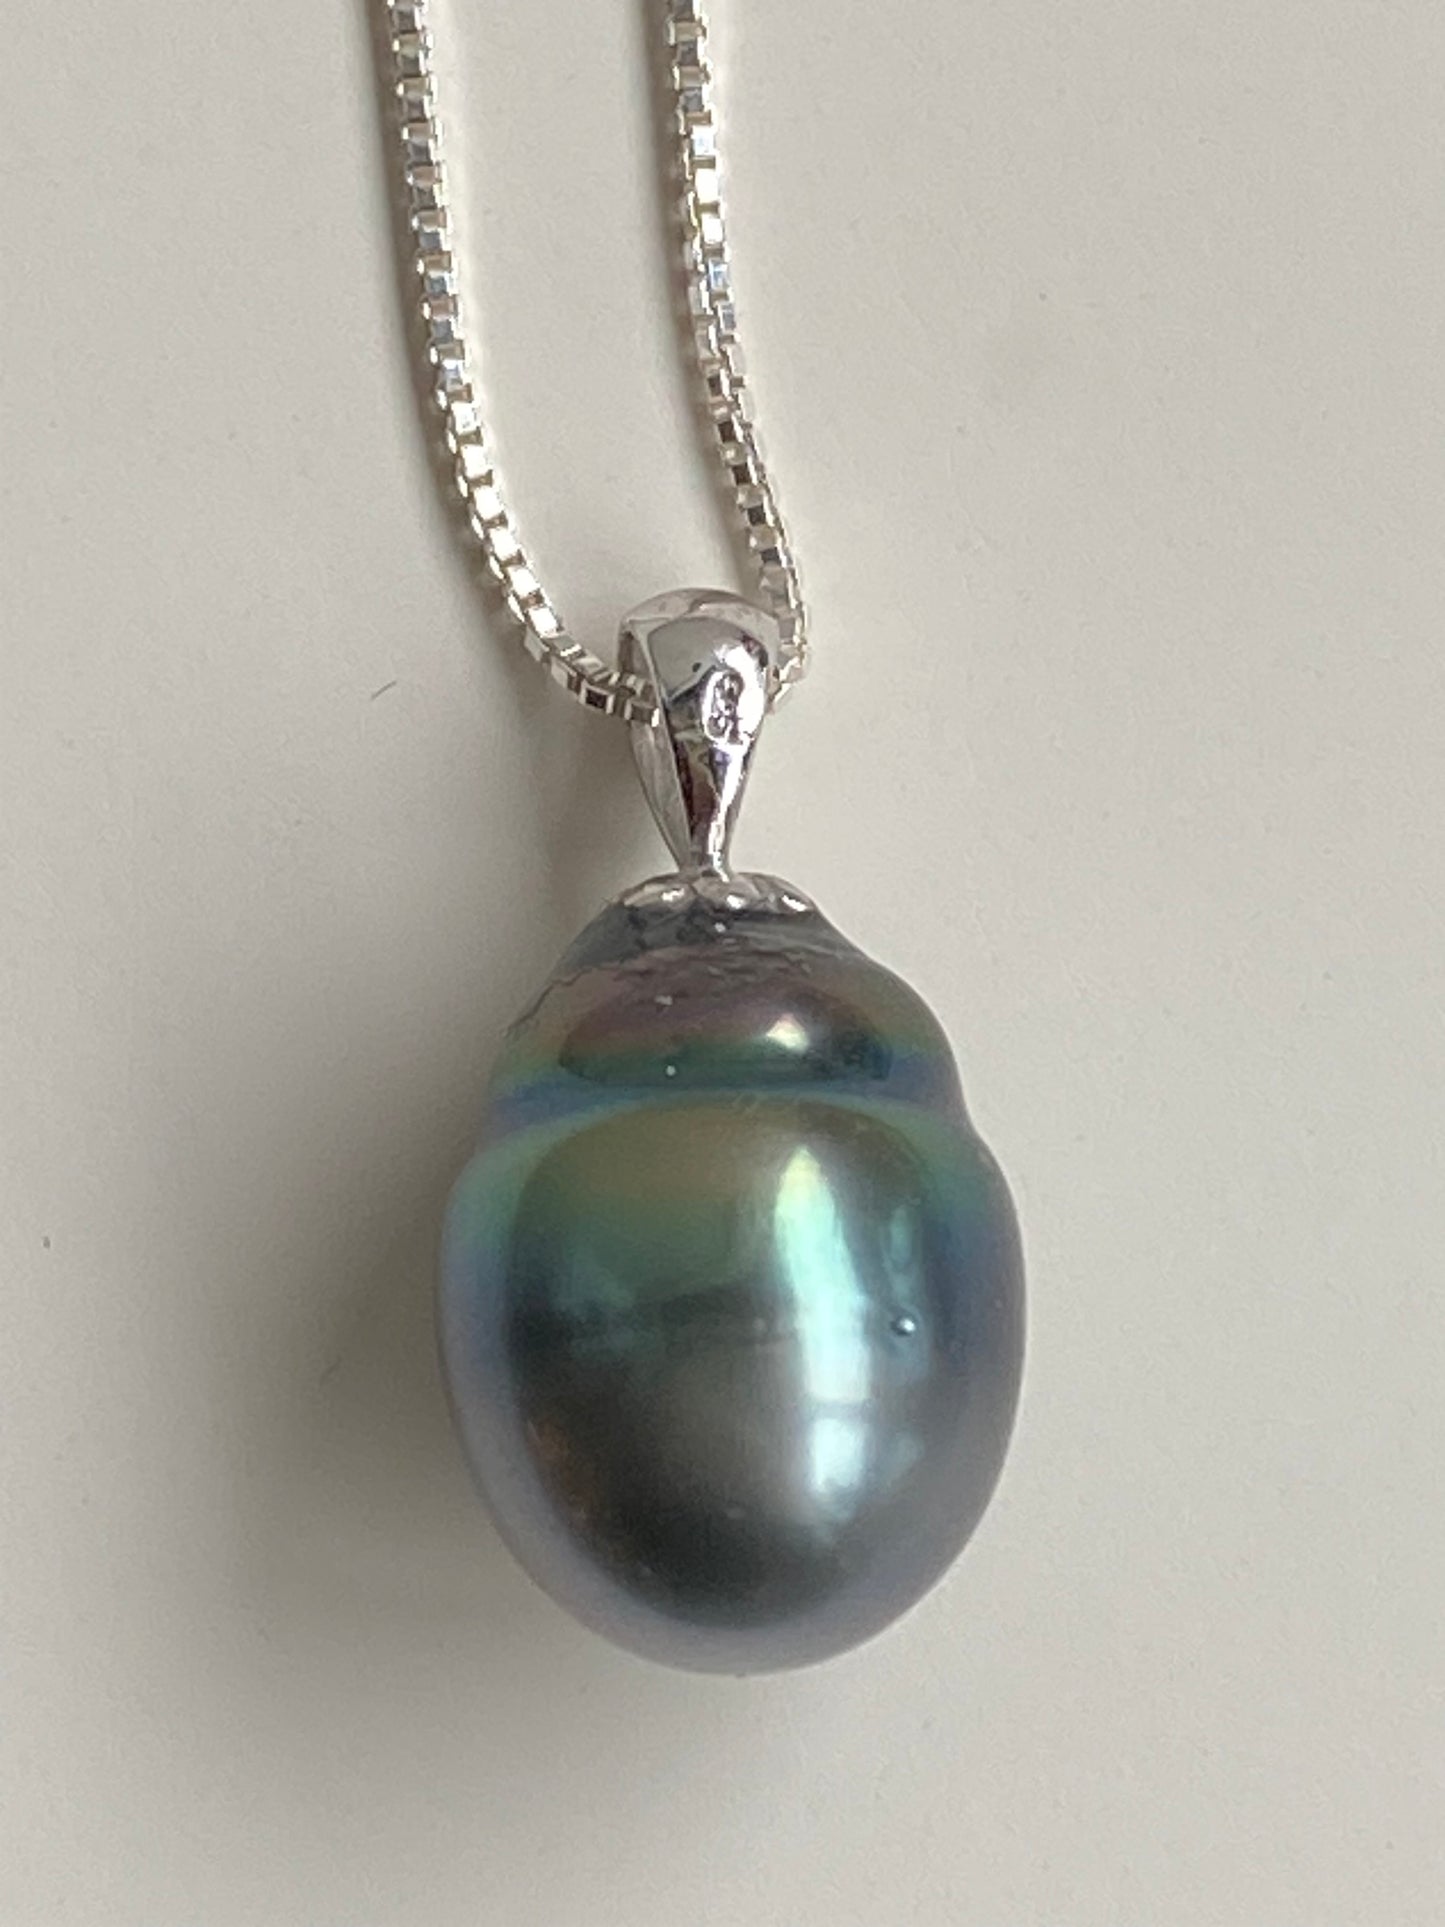 11-15mm Tahitian Pearl Pendant on 14k White Gold with Sterling Chain by Linda Queally